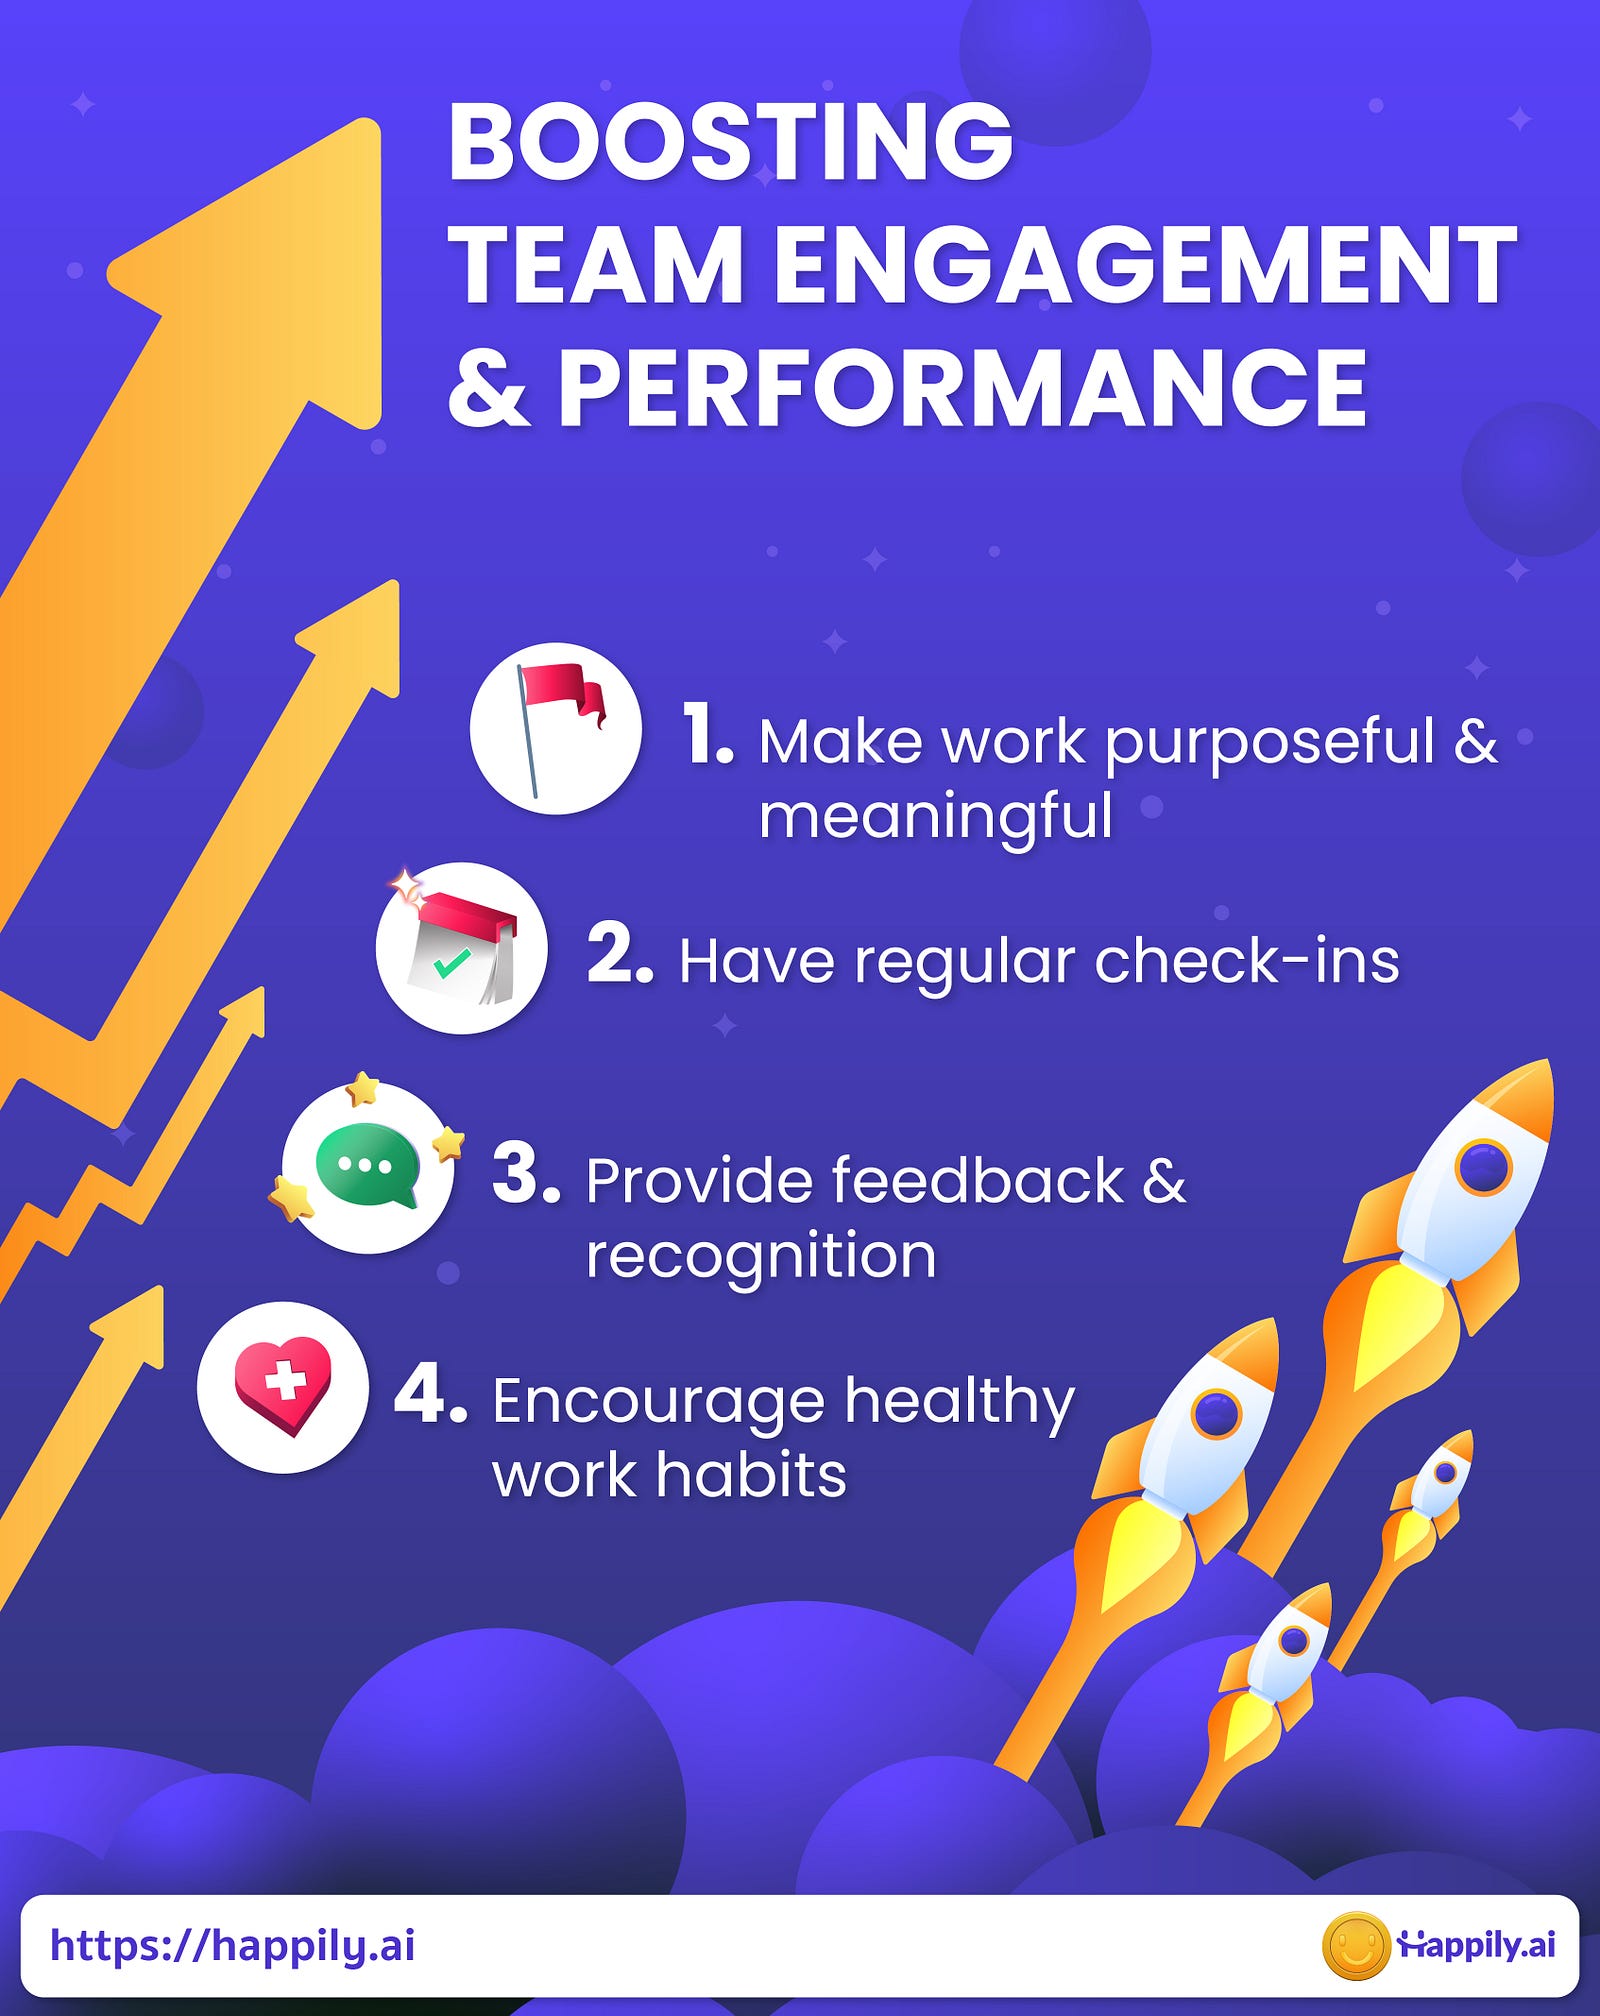 Boosting team engagement and performance